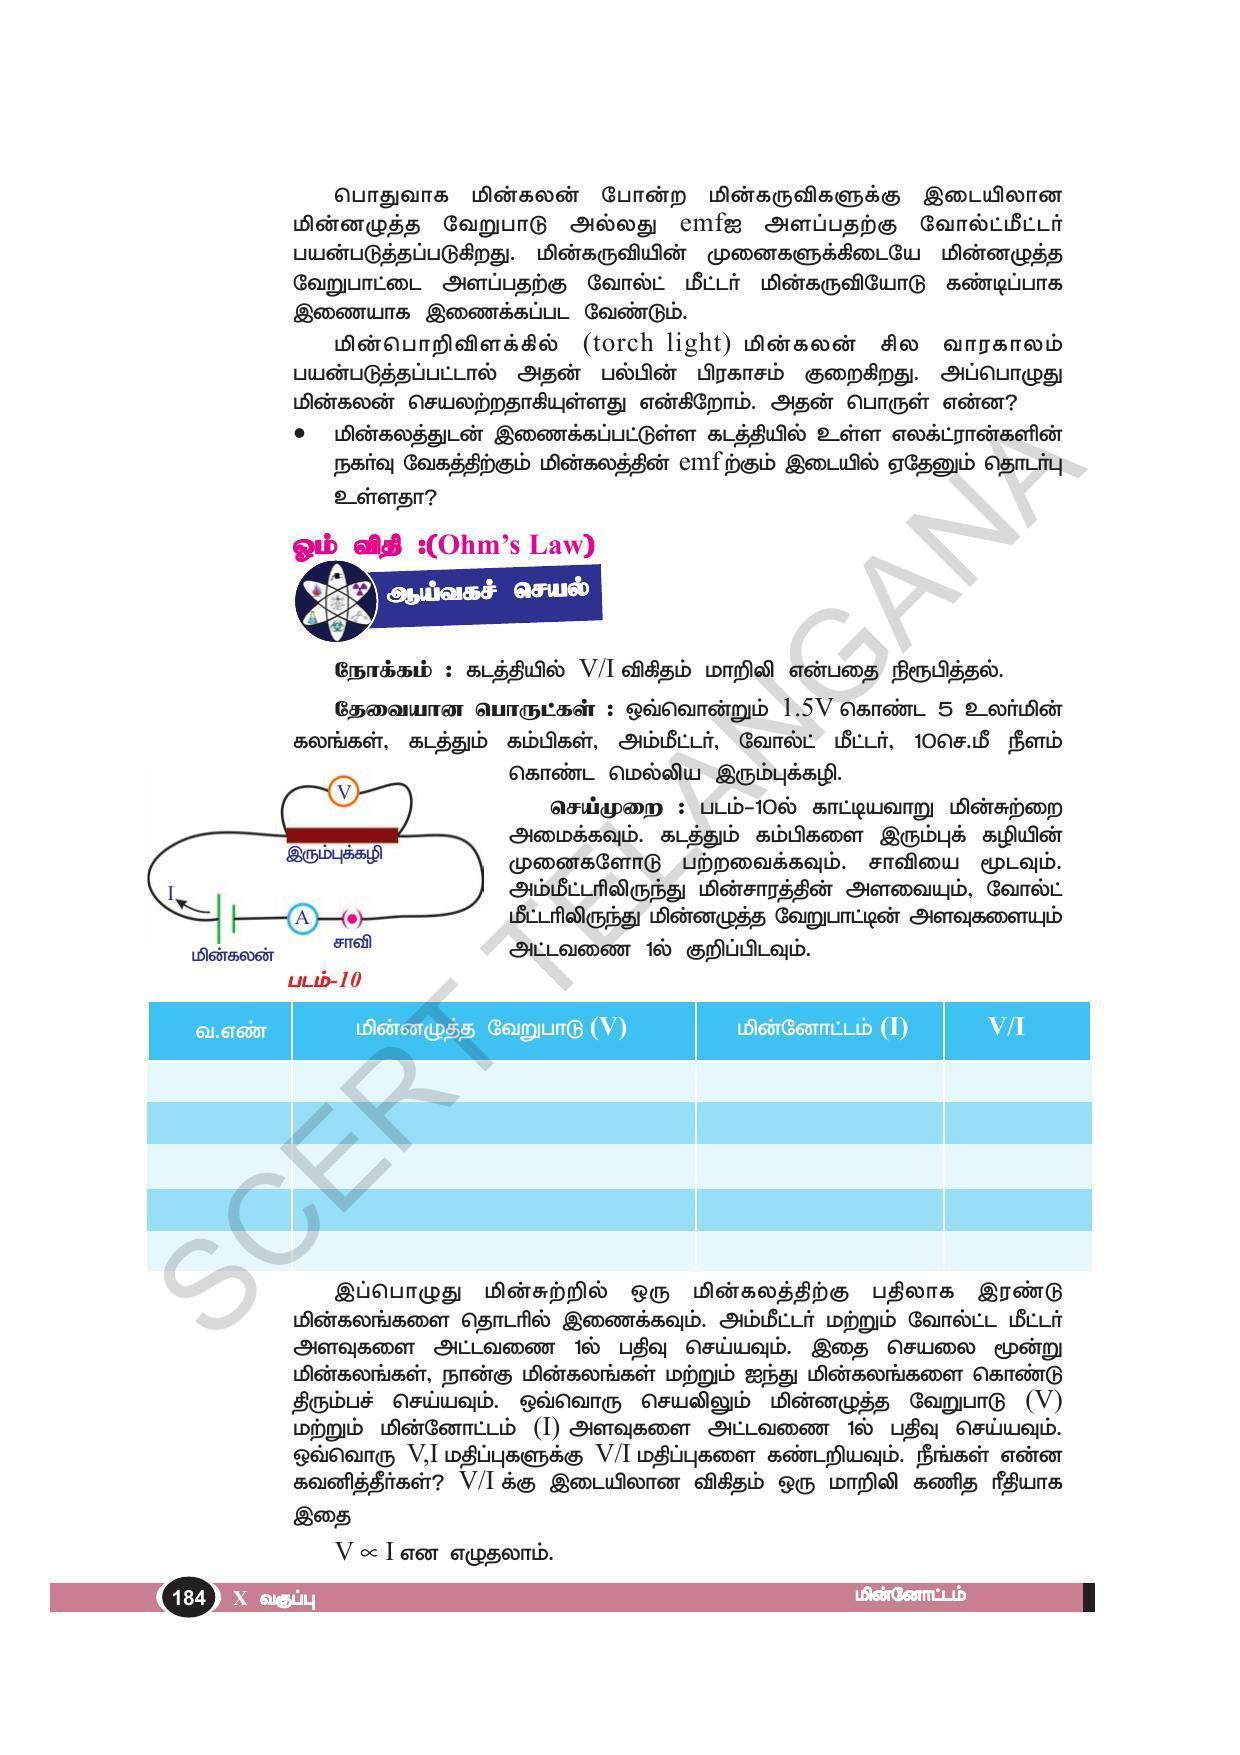 TS SCERT Class 10 Physical Science(Tamil Medium) Text Book - Page 196